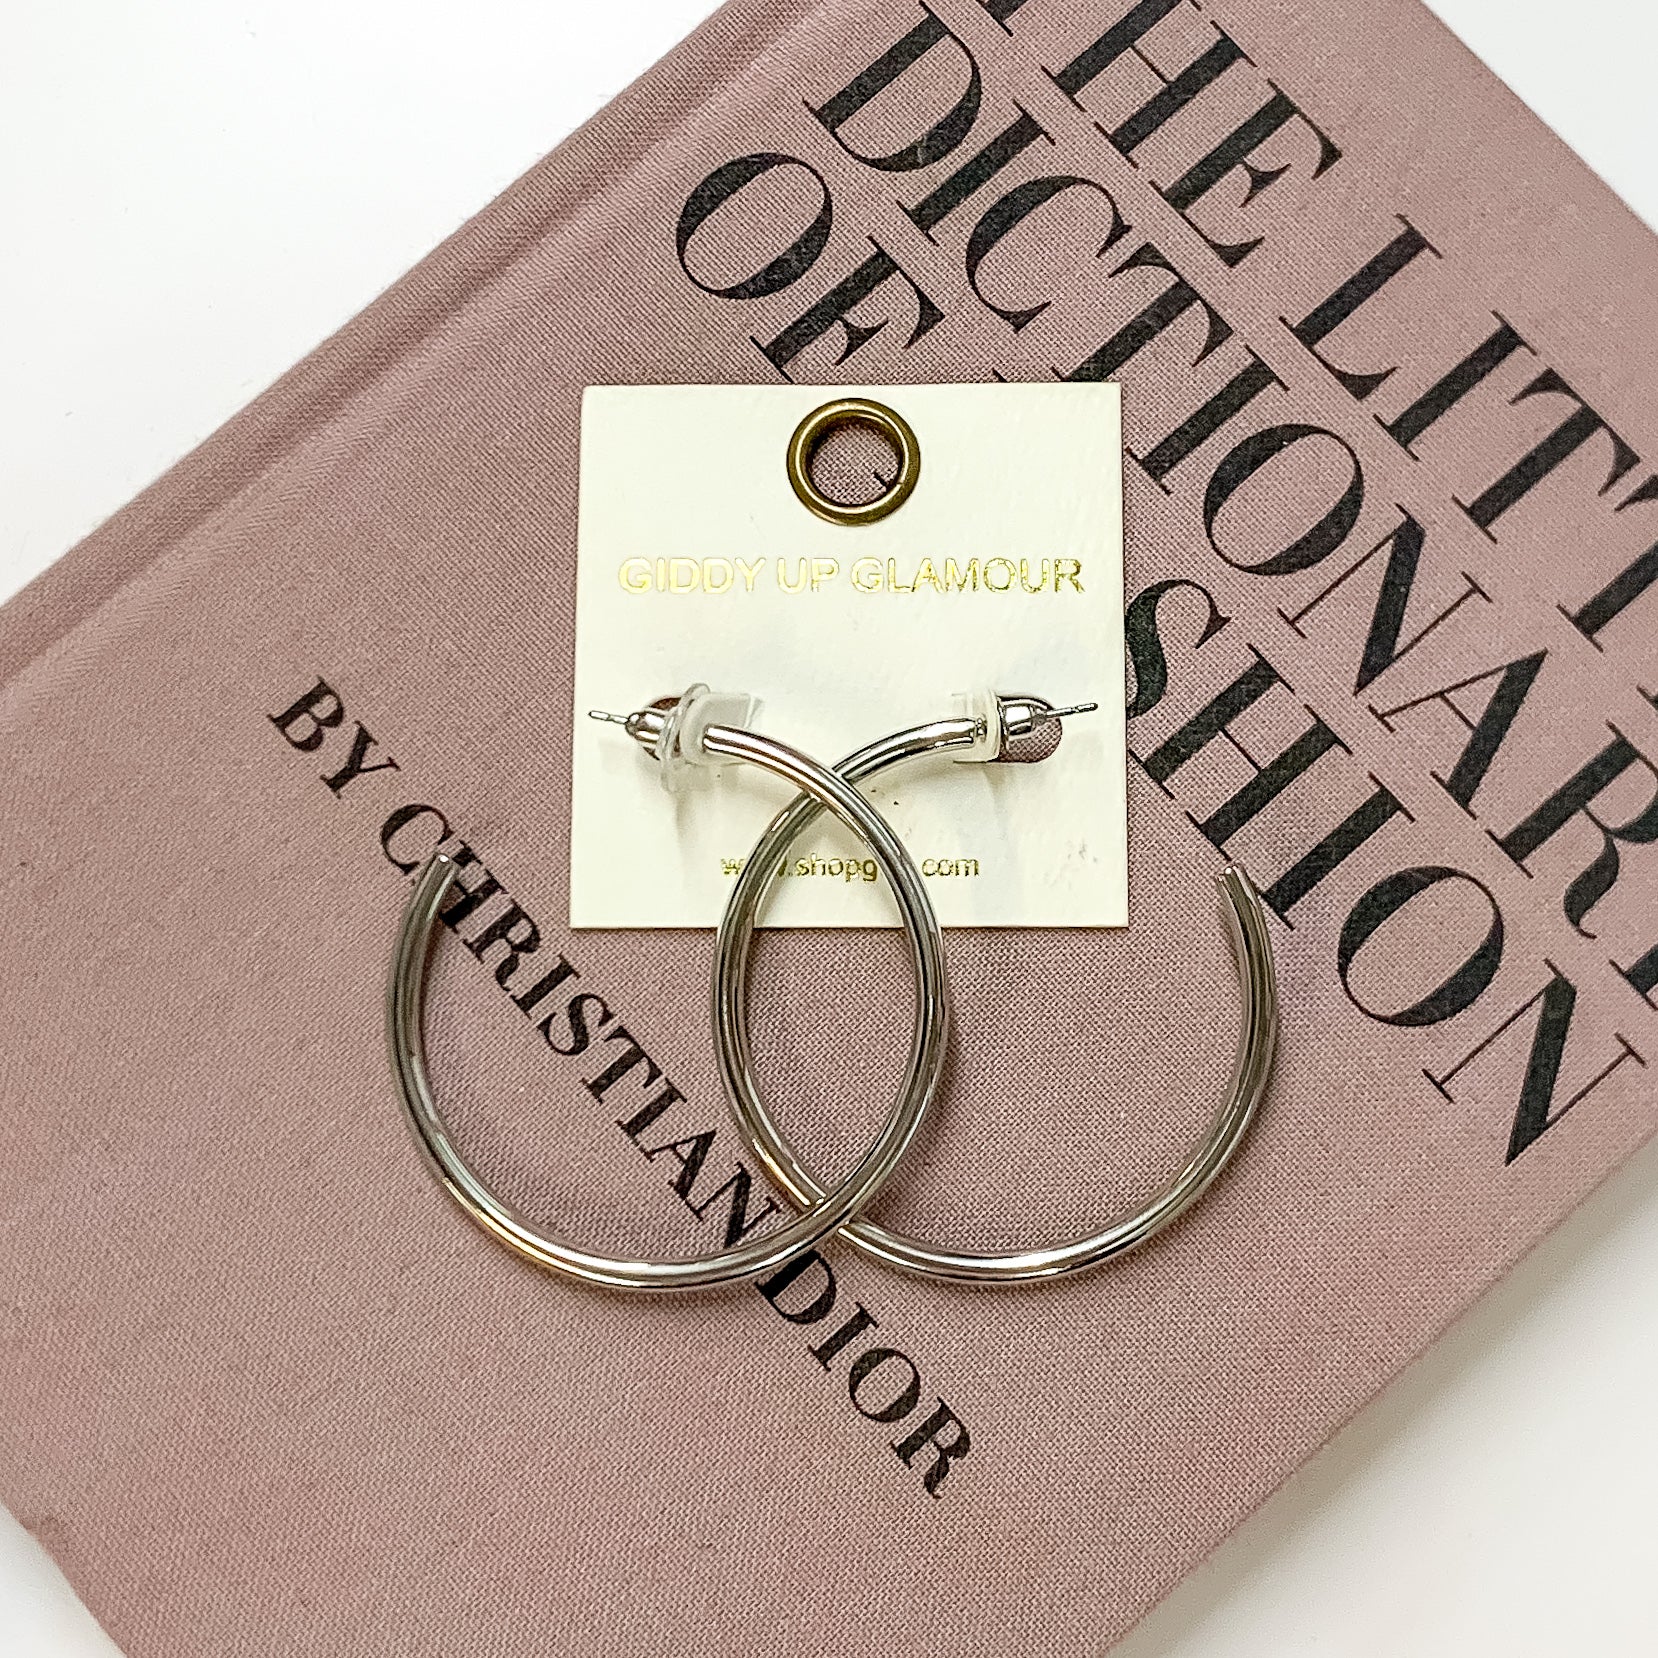 Basic Love 2 Inch Round Hoop Earrings in Silver Tone - Giddy Up Glamour Boutique